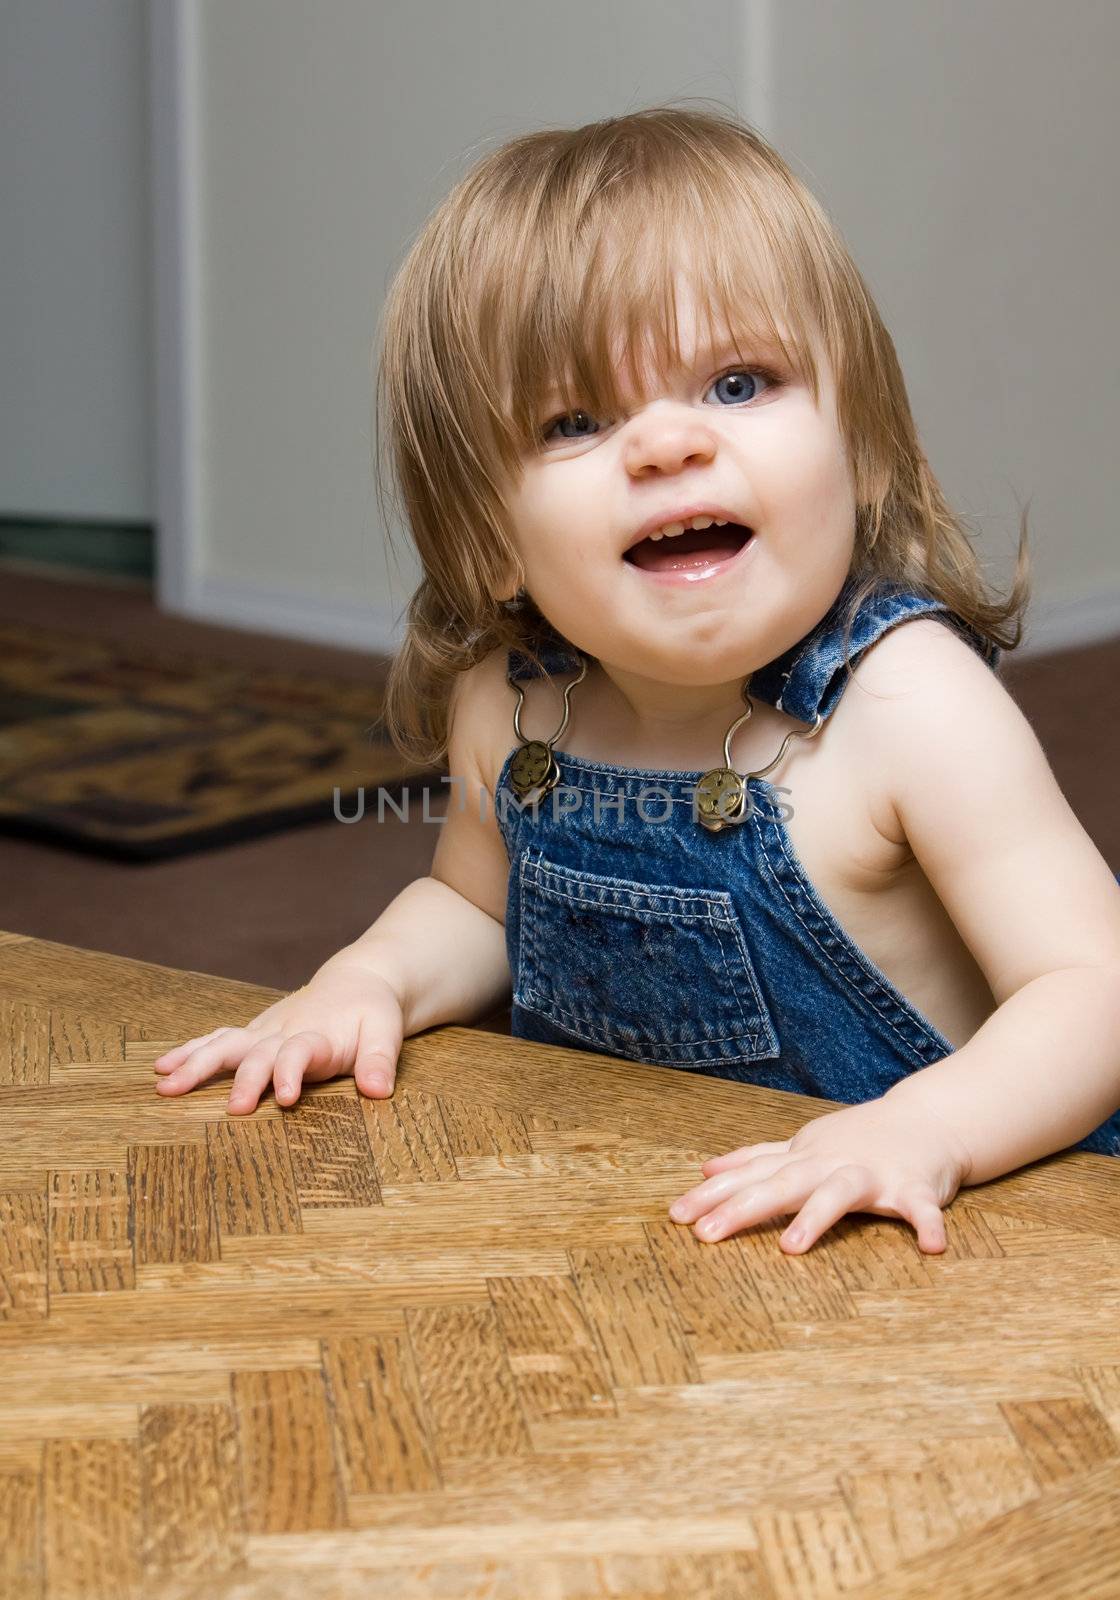 Smiling child in overalls